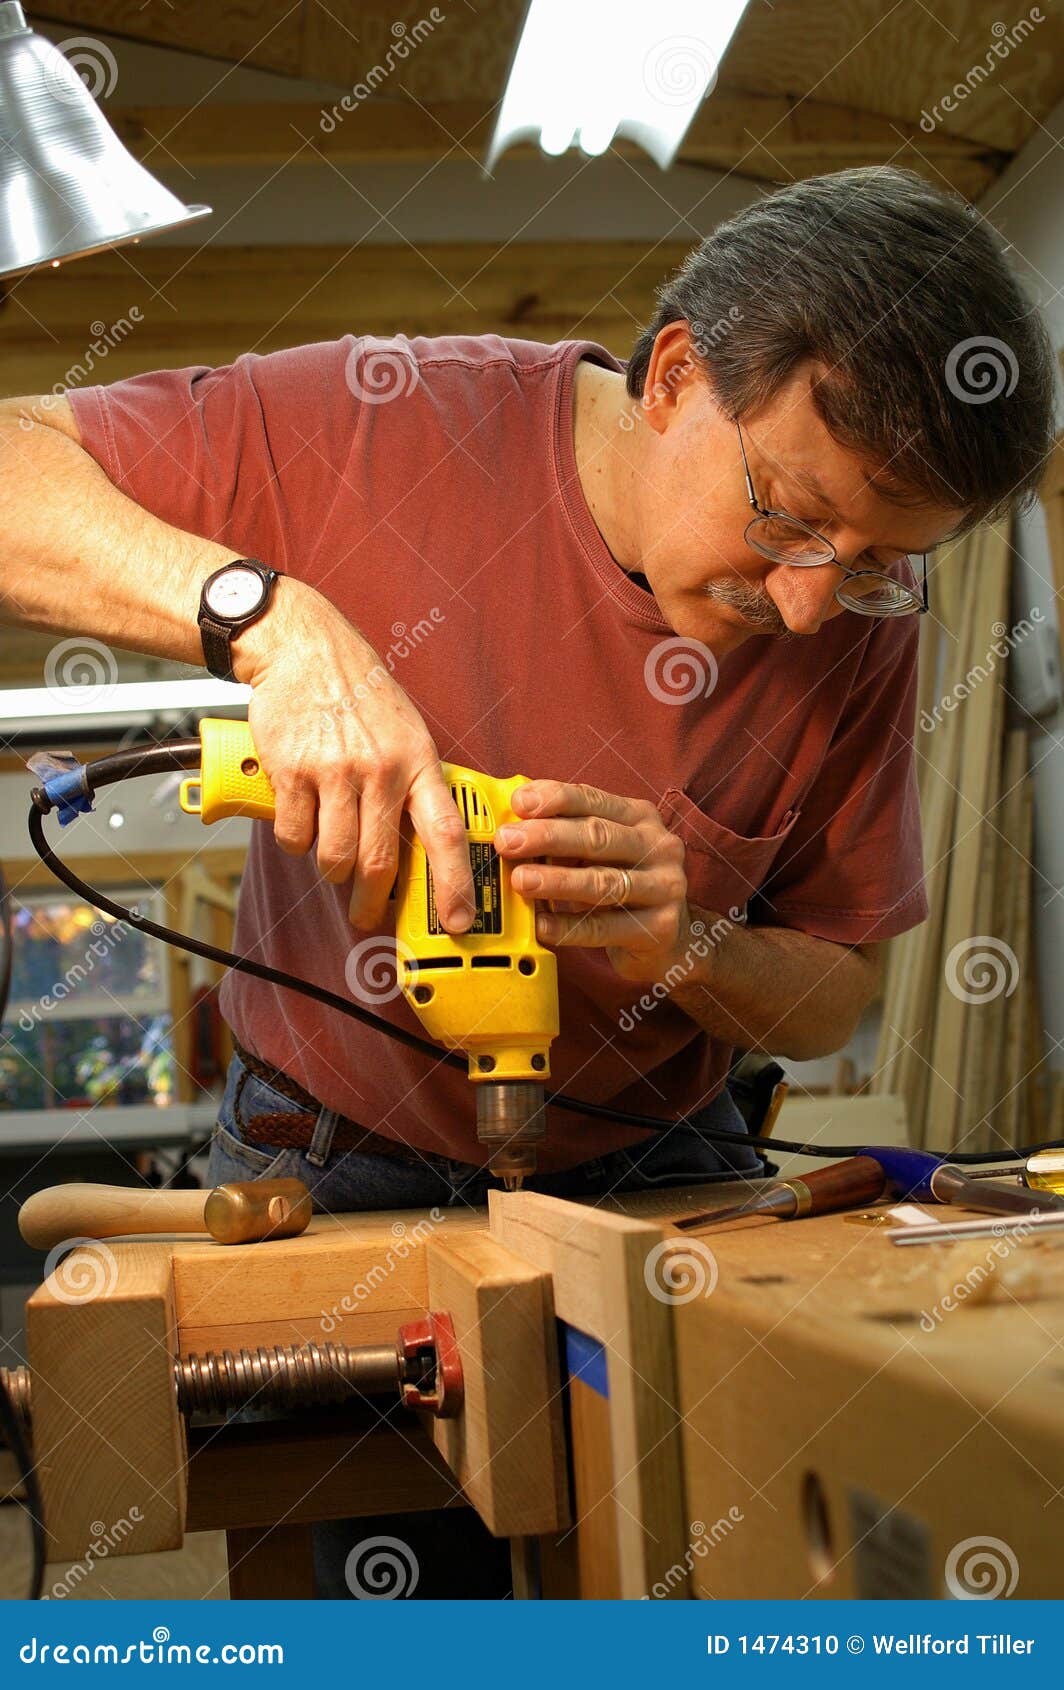 woodworker with drill